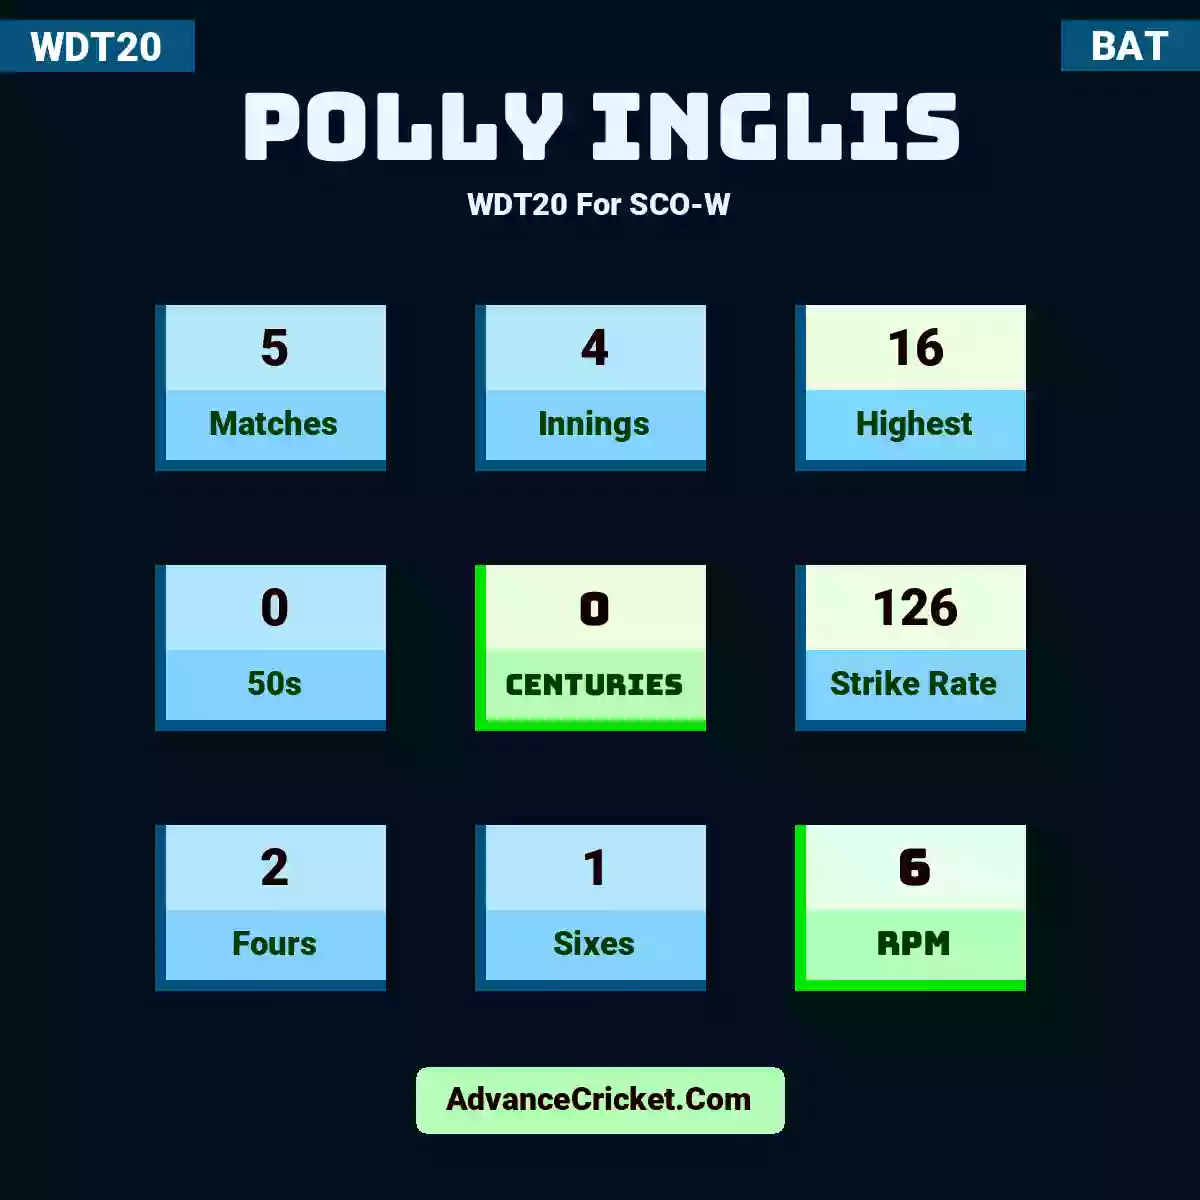 Polly Inglis WDT20  For SCO-W, Polly Inglis played 5 matches, scored 16 runs as highest, 0 half-centuries, and 0 centuries, with a strike rate of 126. P.Inglis hit 2 fours and 1 sixes, with an RPM of 6.